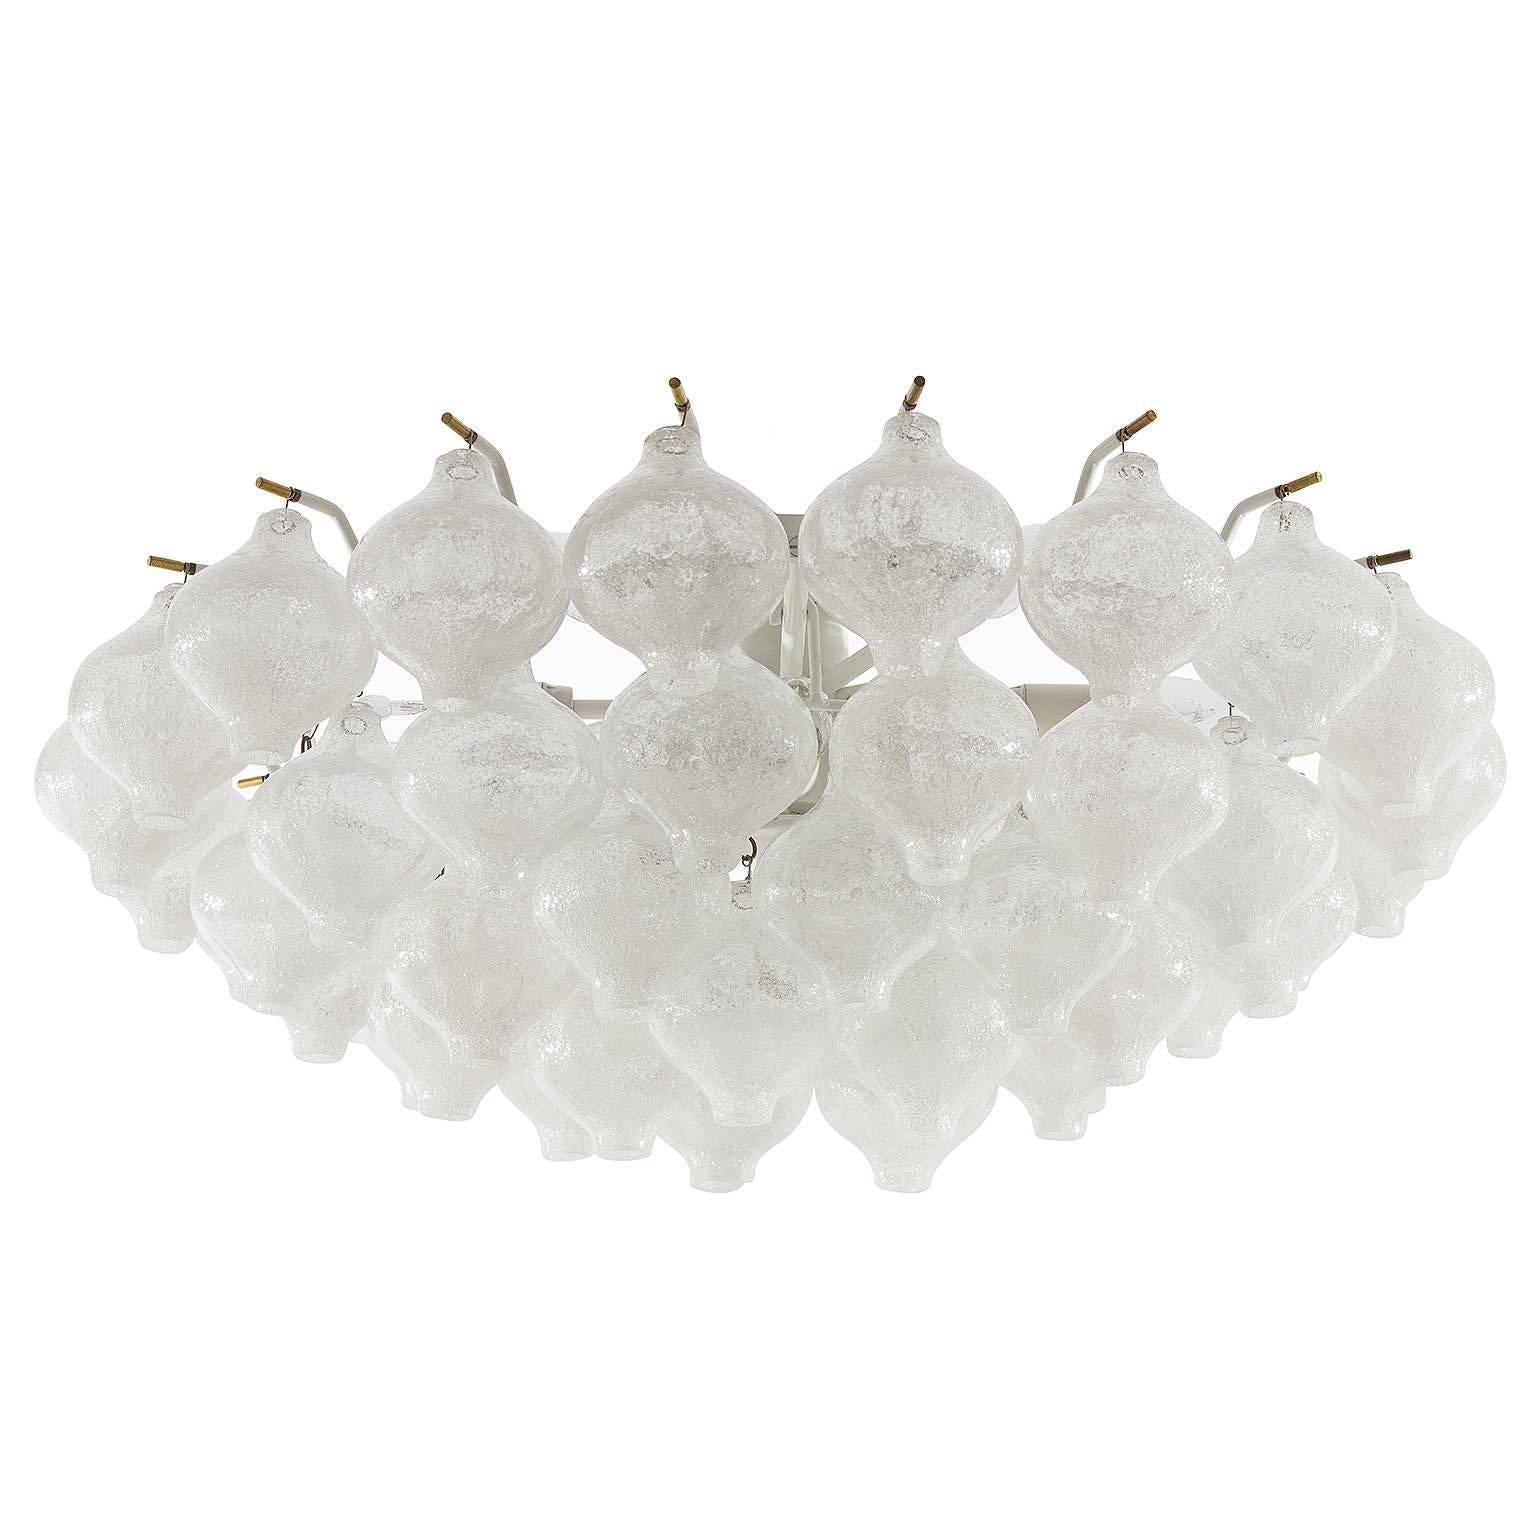 A large and fantastic 'Tulipan' flush mount chandeliers by J.T. Kalmar, Austria, Vienna, manufactured in midcentury, circa 1970 (late 1960s or early 1970s).
The name Tulipan derives from the tulip shaped hand blown bubble glasses. Fifty glasses are